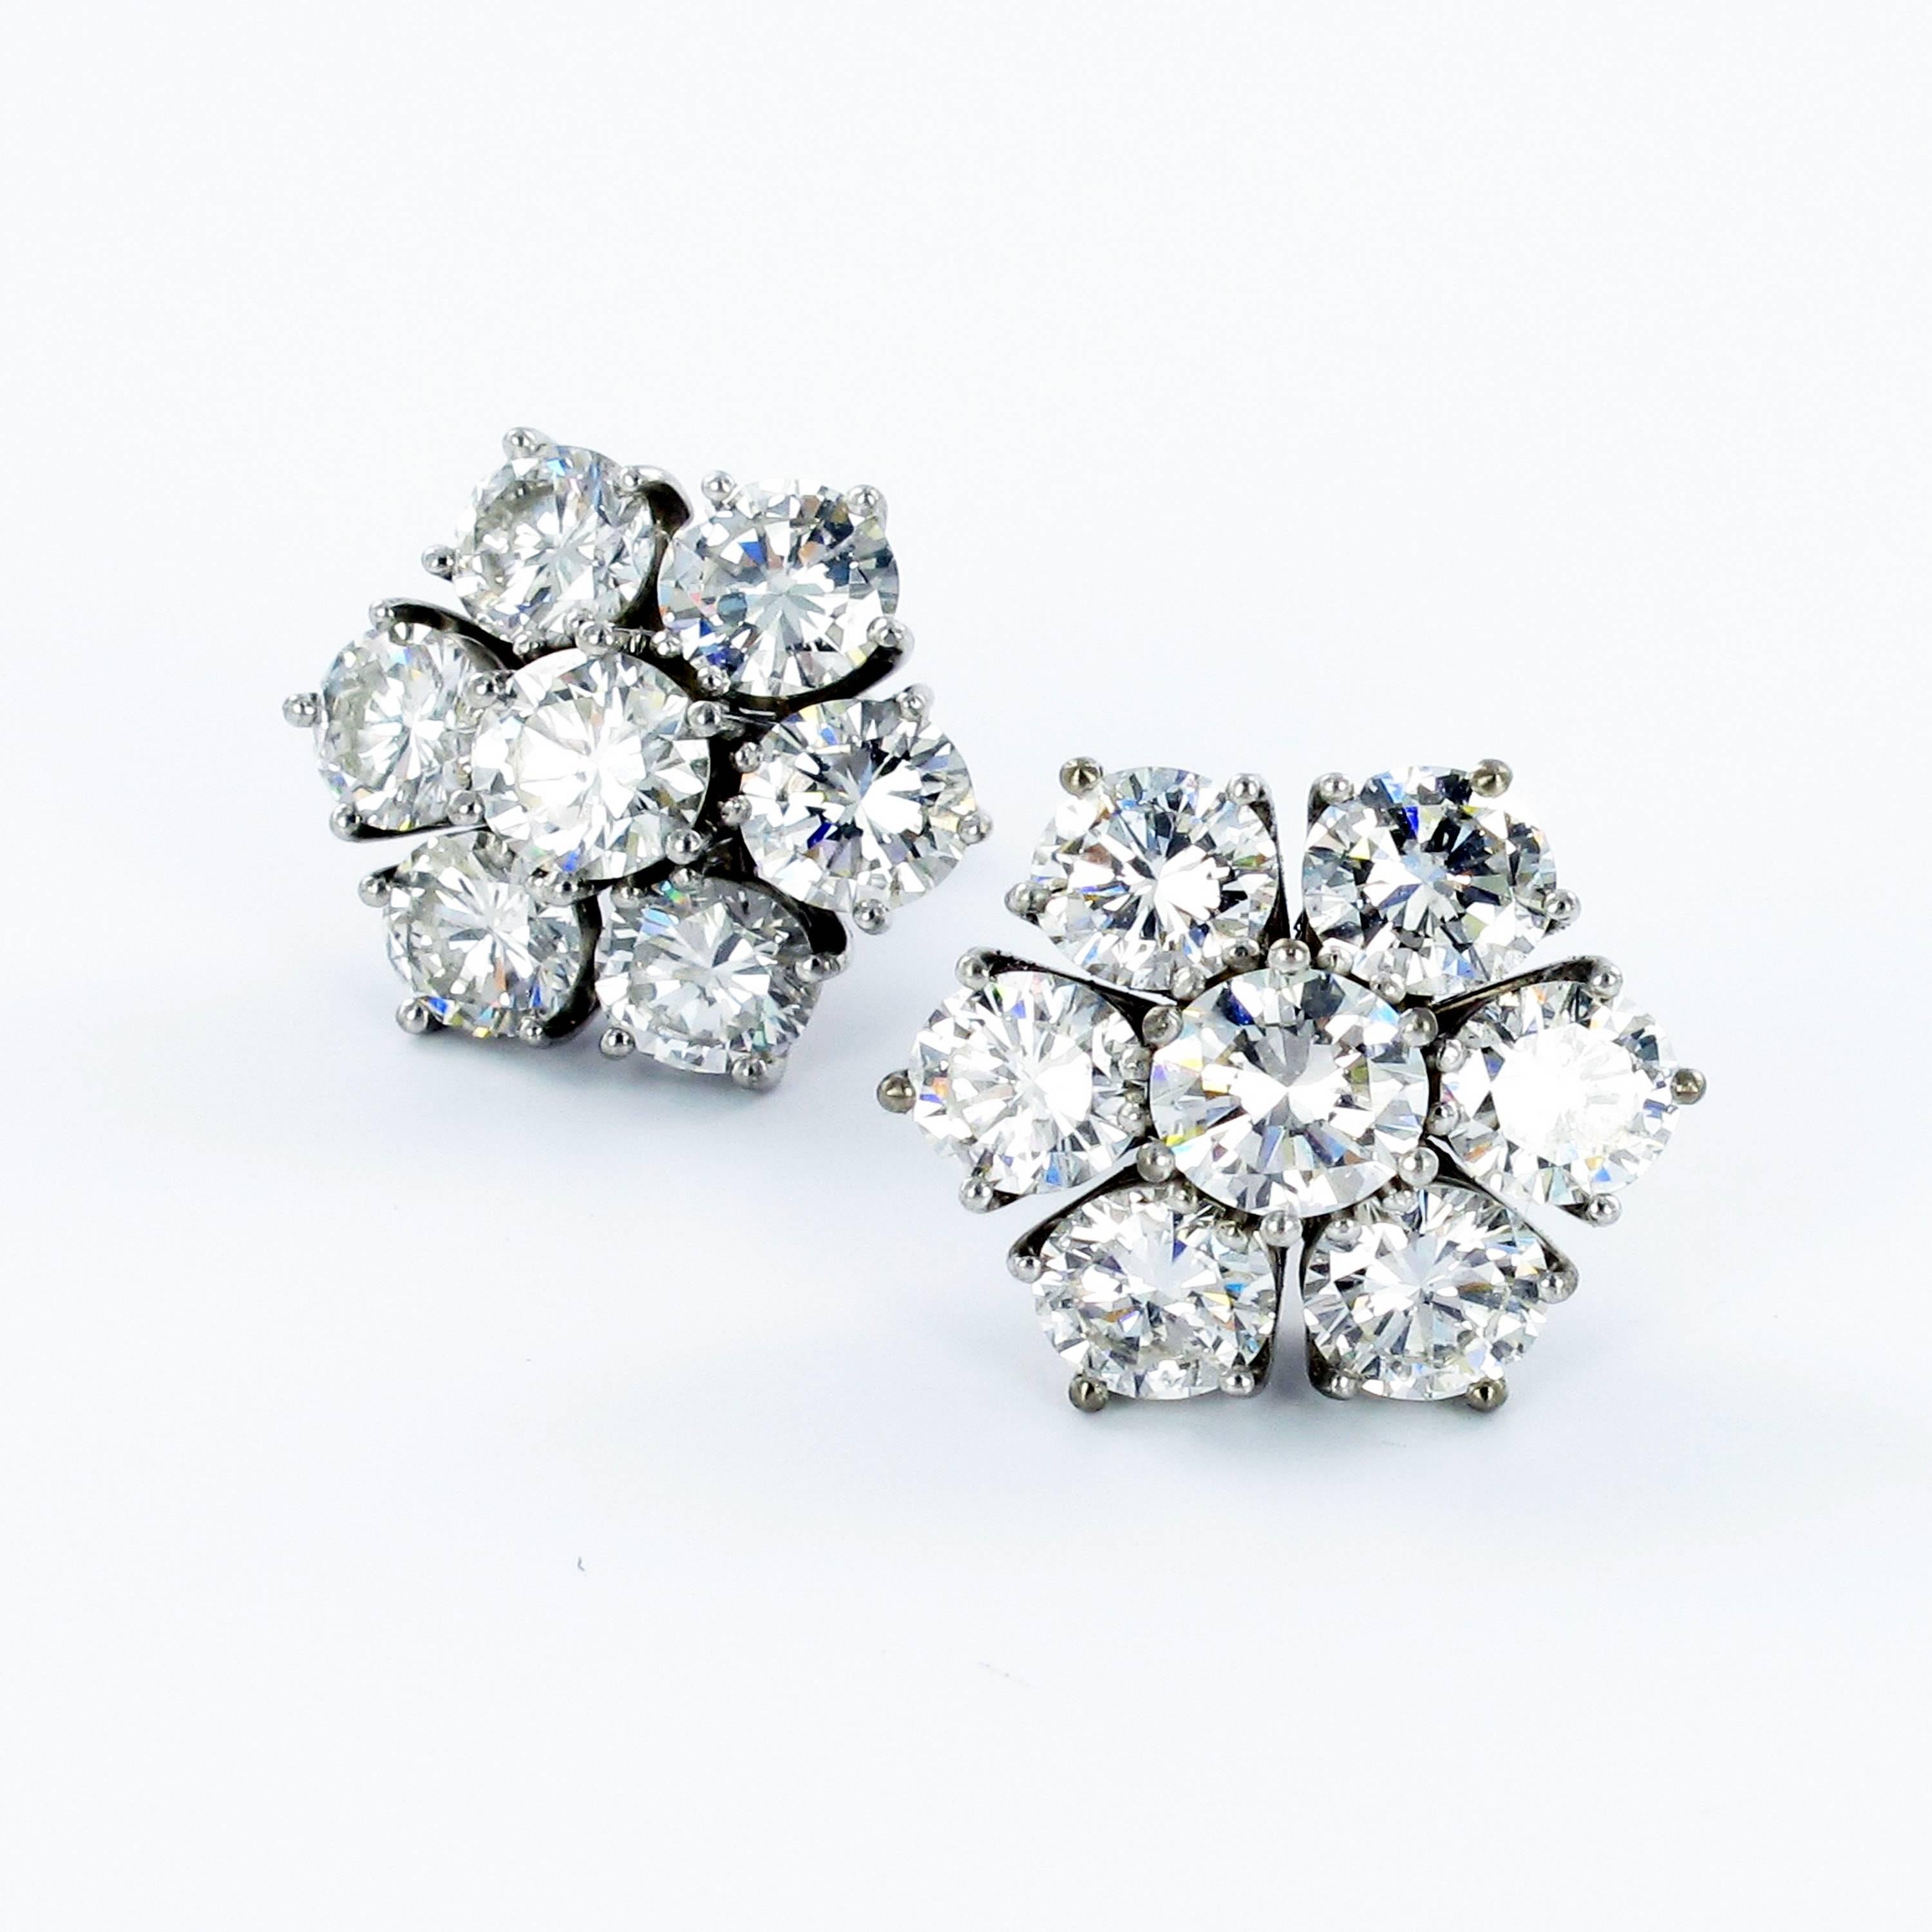 All time classic diamond cluster ear studs in white gold 750. Featuring 14 brilliant cut diamonds each carefully set in five prongs. Individual diamond weights just slightly under half a carat totaling approximate 6.74 ct. Fine F/G color and vs